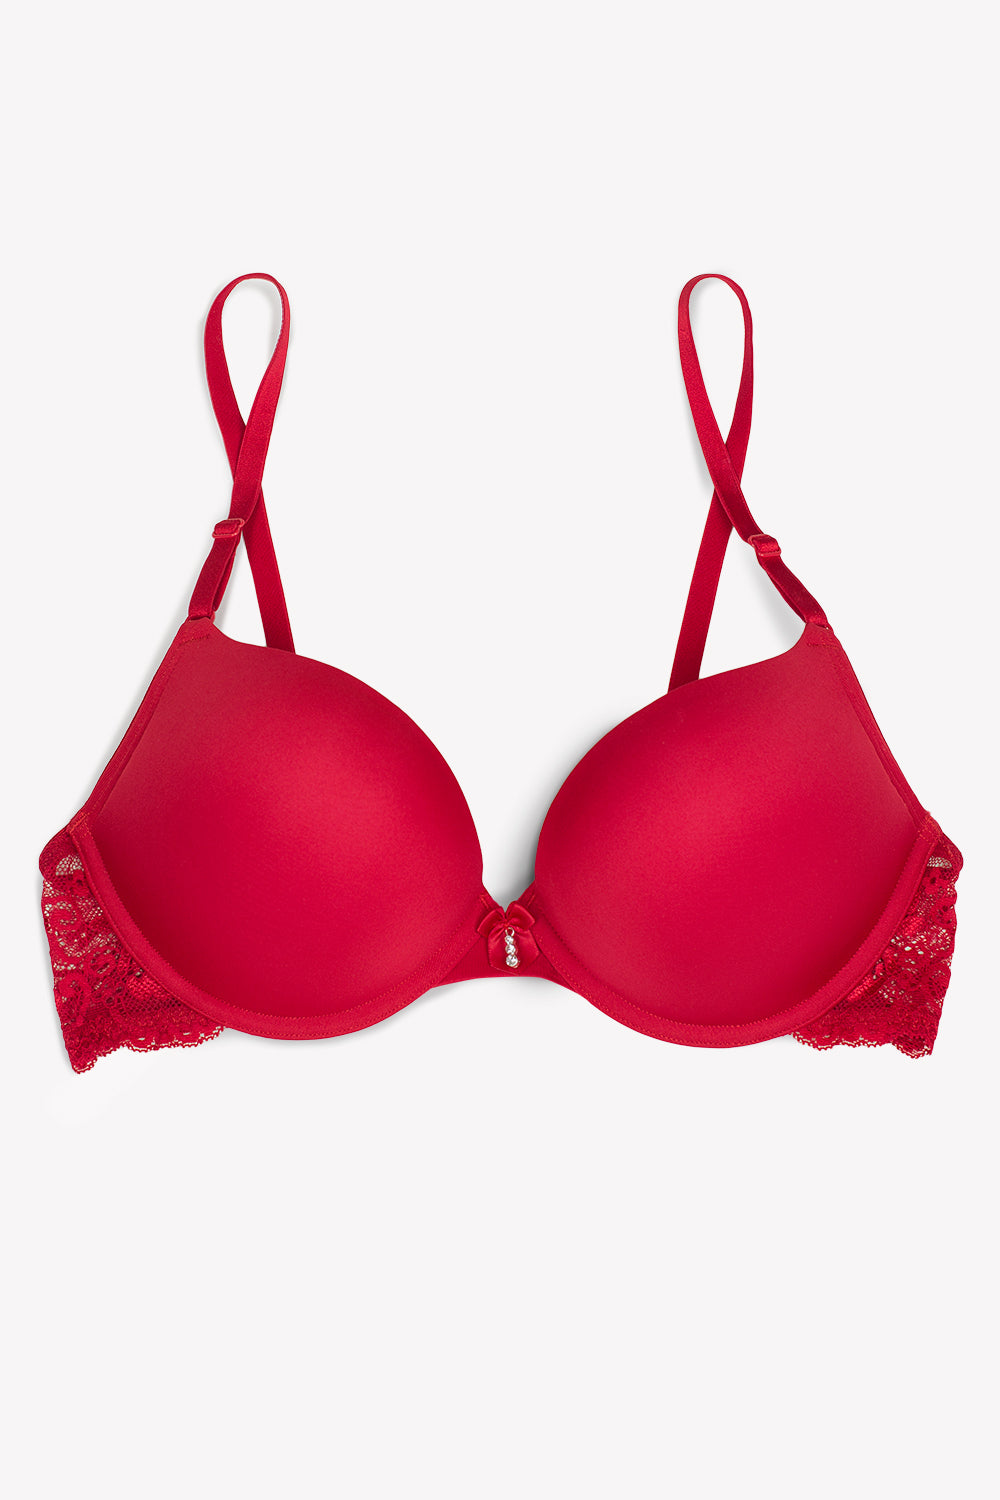 https://www.smartandsexy.com/cdn/shop/products/FLAT-SMART-AND-SEXY-SMOOTH-RED-ADD-2-SIZES-PUSH-UP-BRA-SA276.jpg?v=1675348746